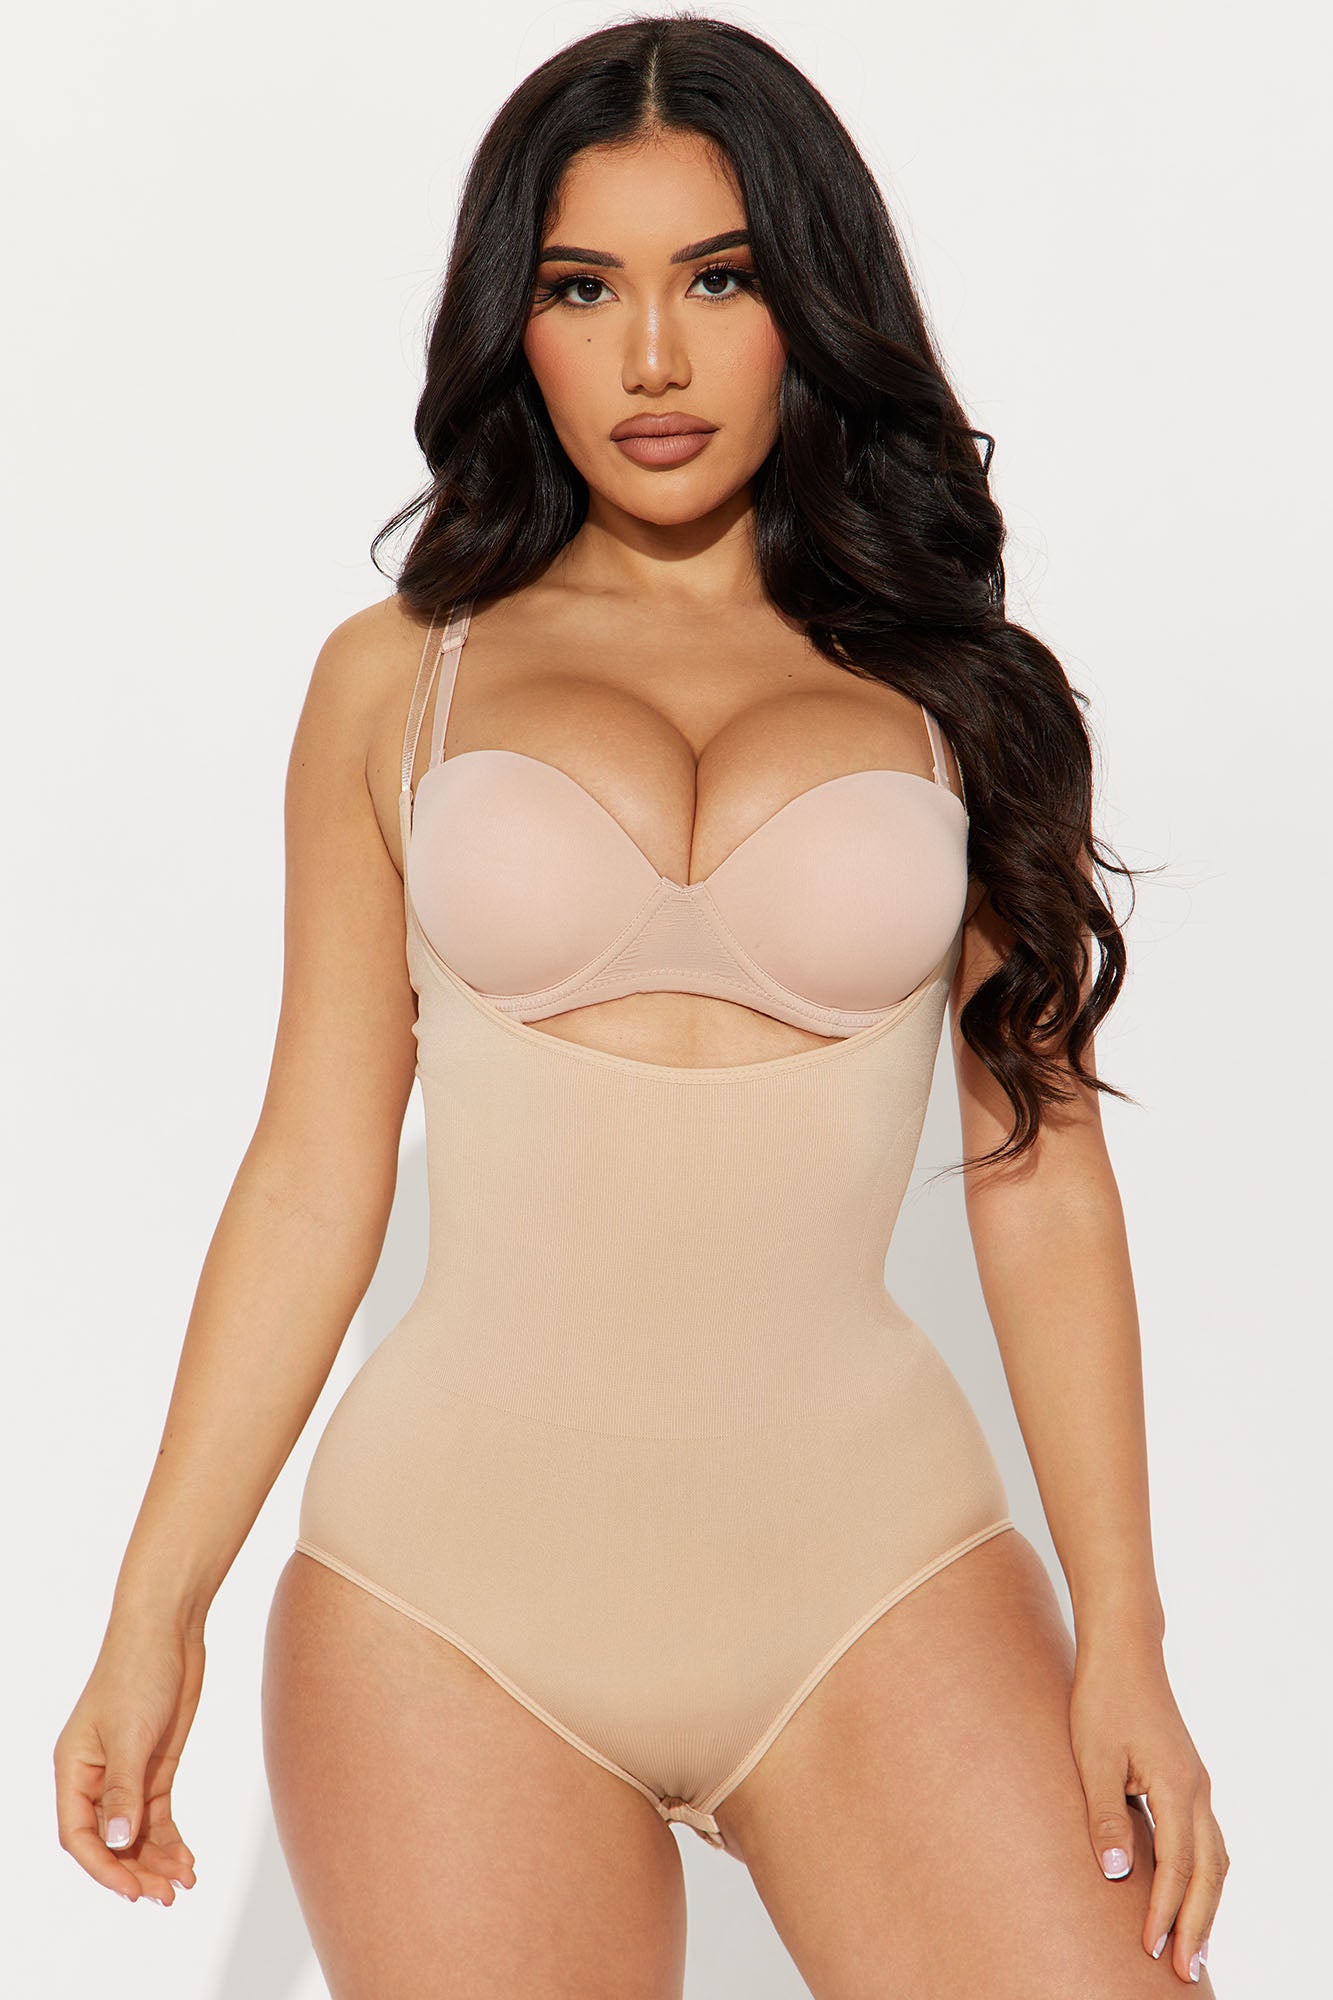 Skinlook - Soft Post Surgical Maternity Shapewear - Nude